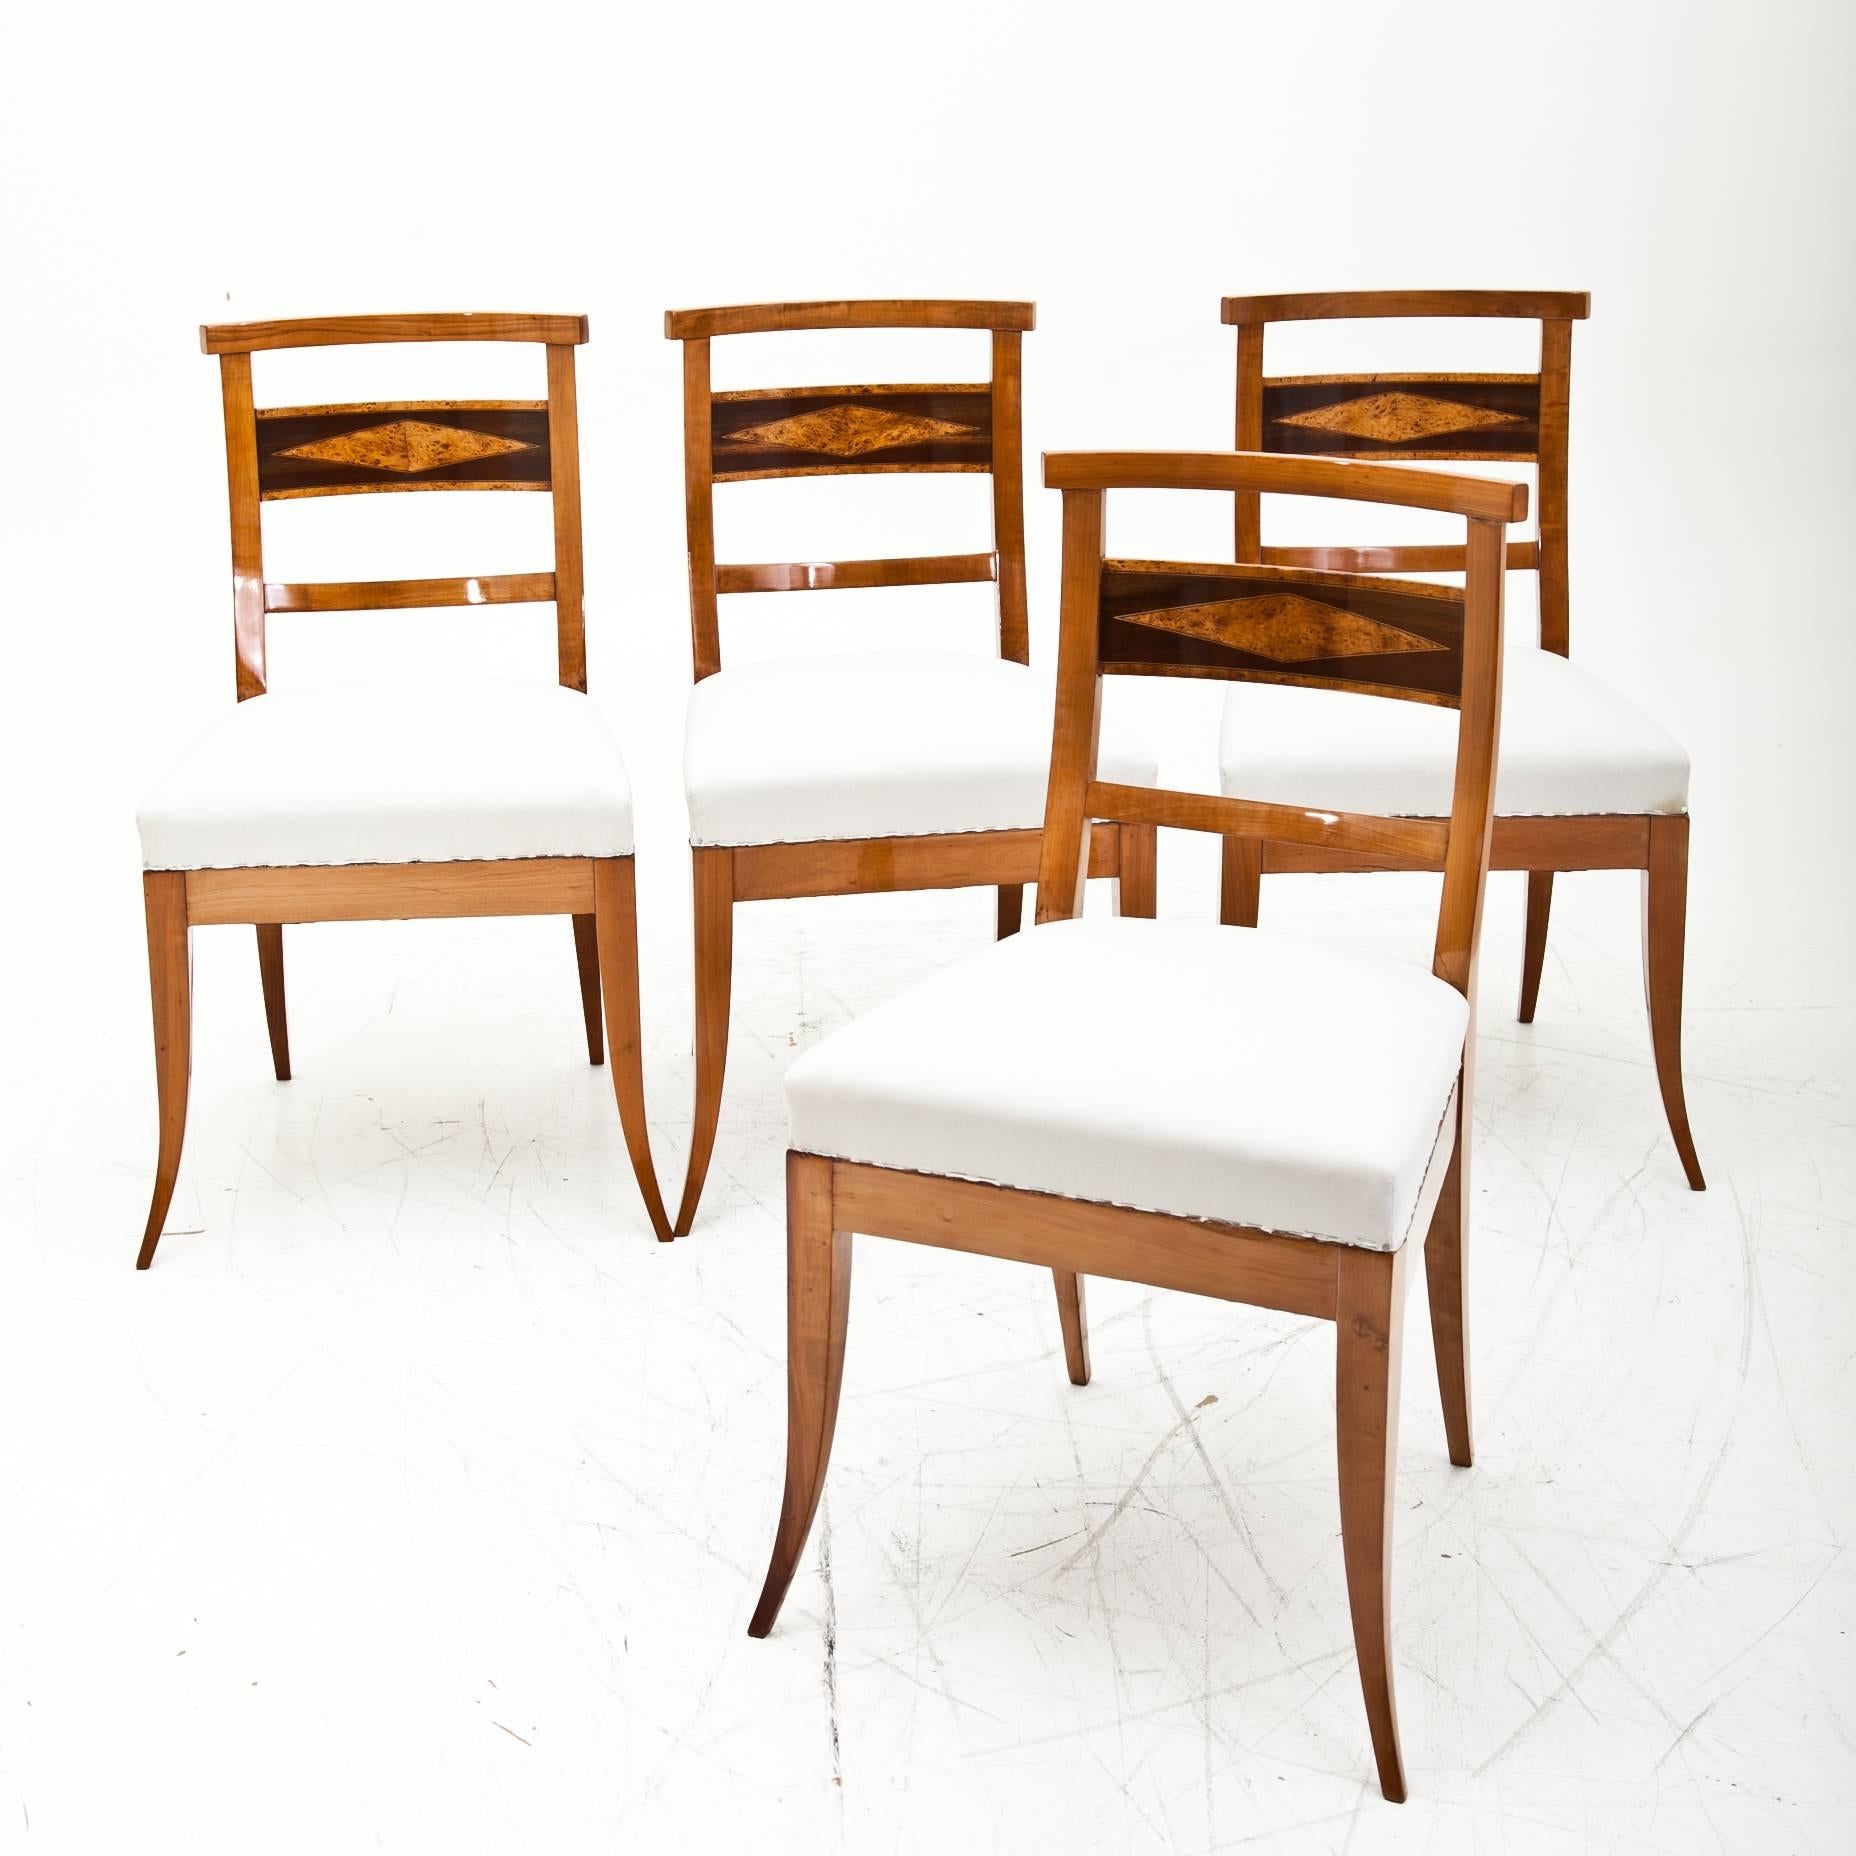 Four Biedermeier dining room chairs on elegant curved legs. The backrests are decorated with a rhomboid burl wood veneer.